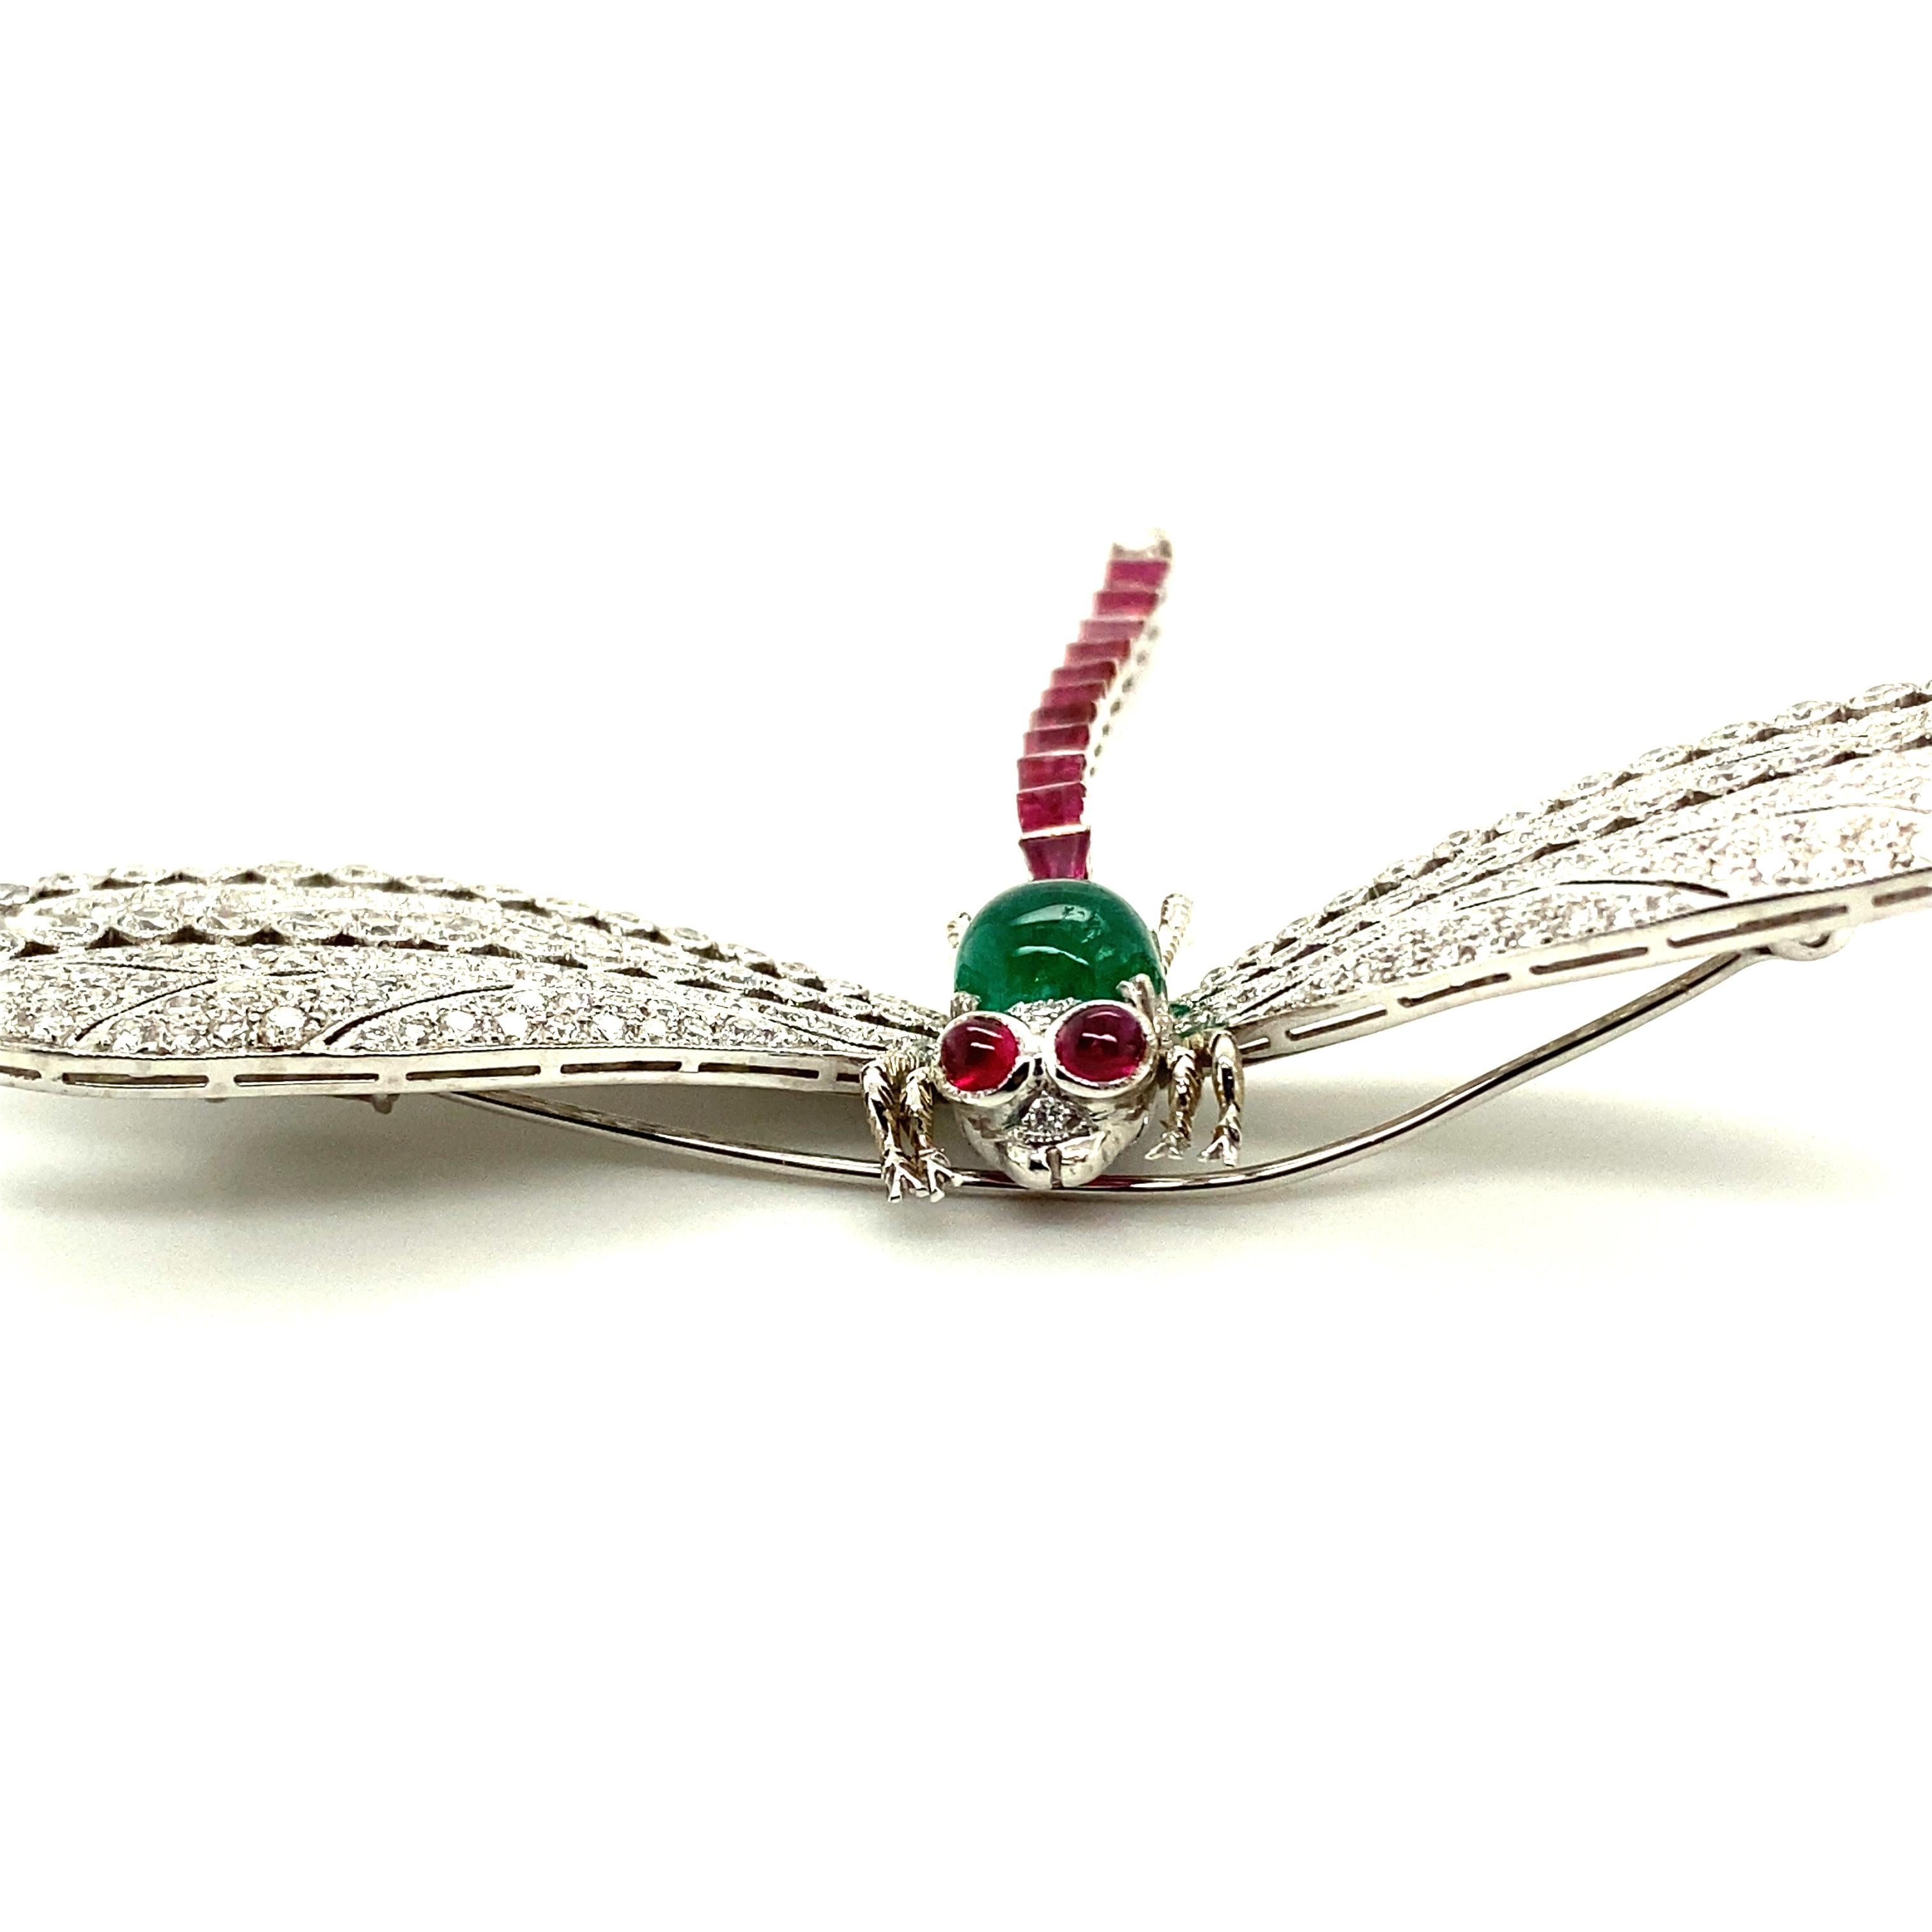 Spectacular Art Deco Style Dragonfly Brooch in 18 Karat White Gold 2